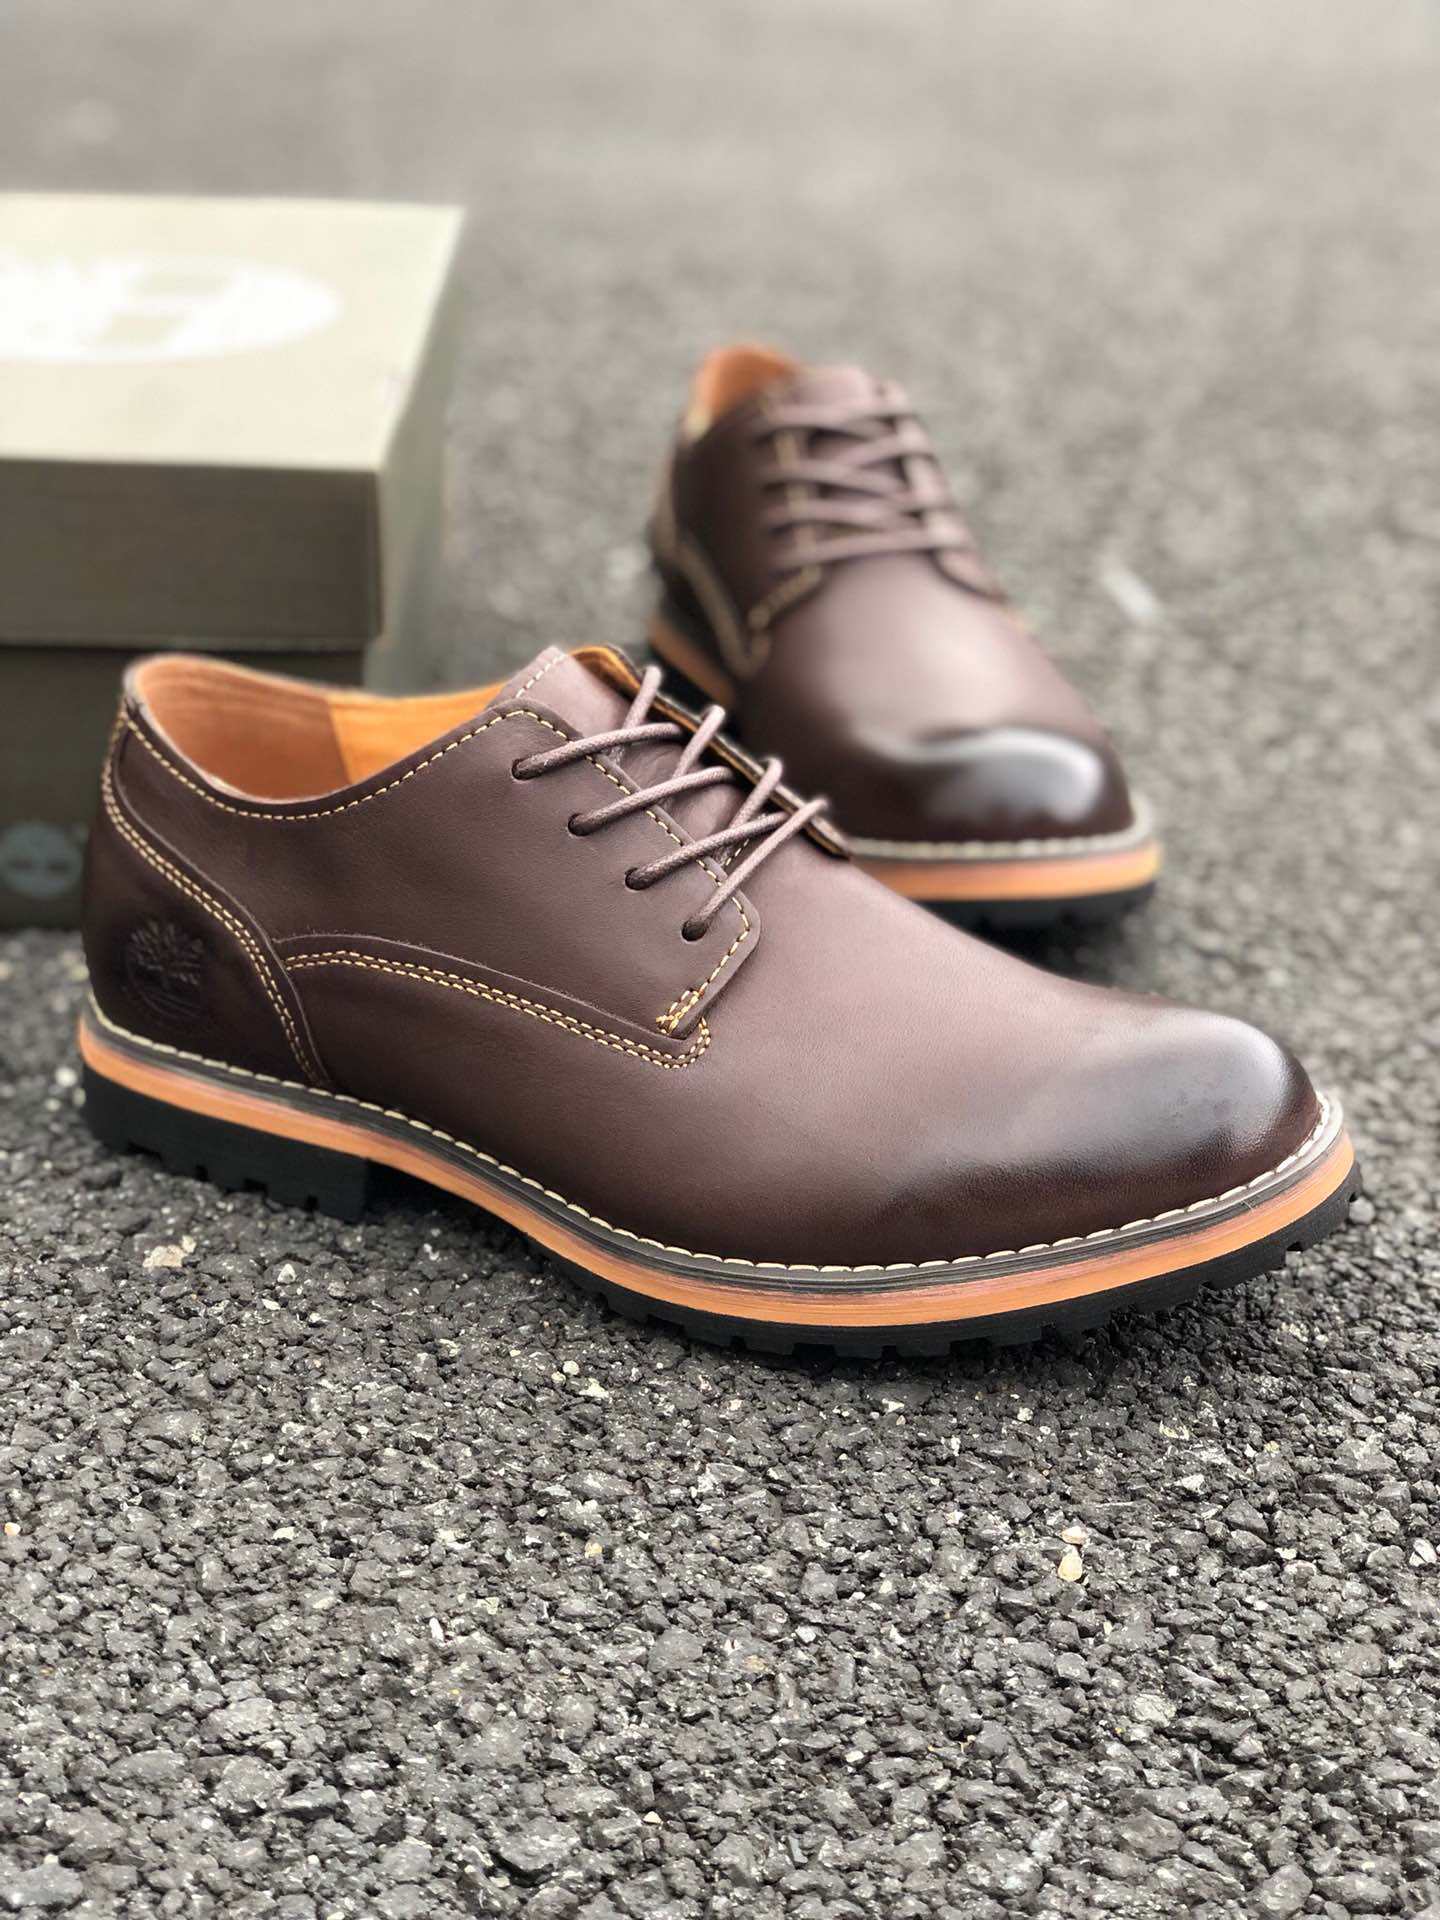 Original Timberland men Casual work shoes hiking shoes shoes sneakers